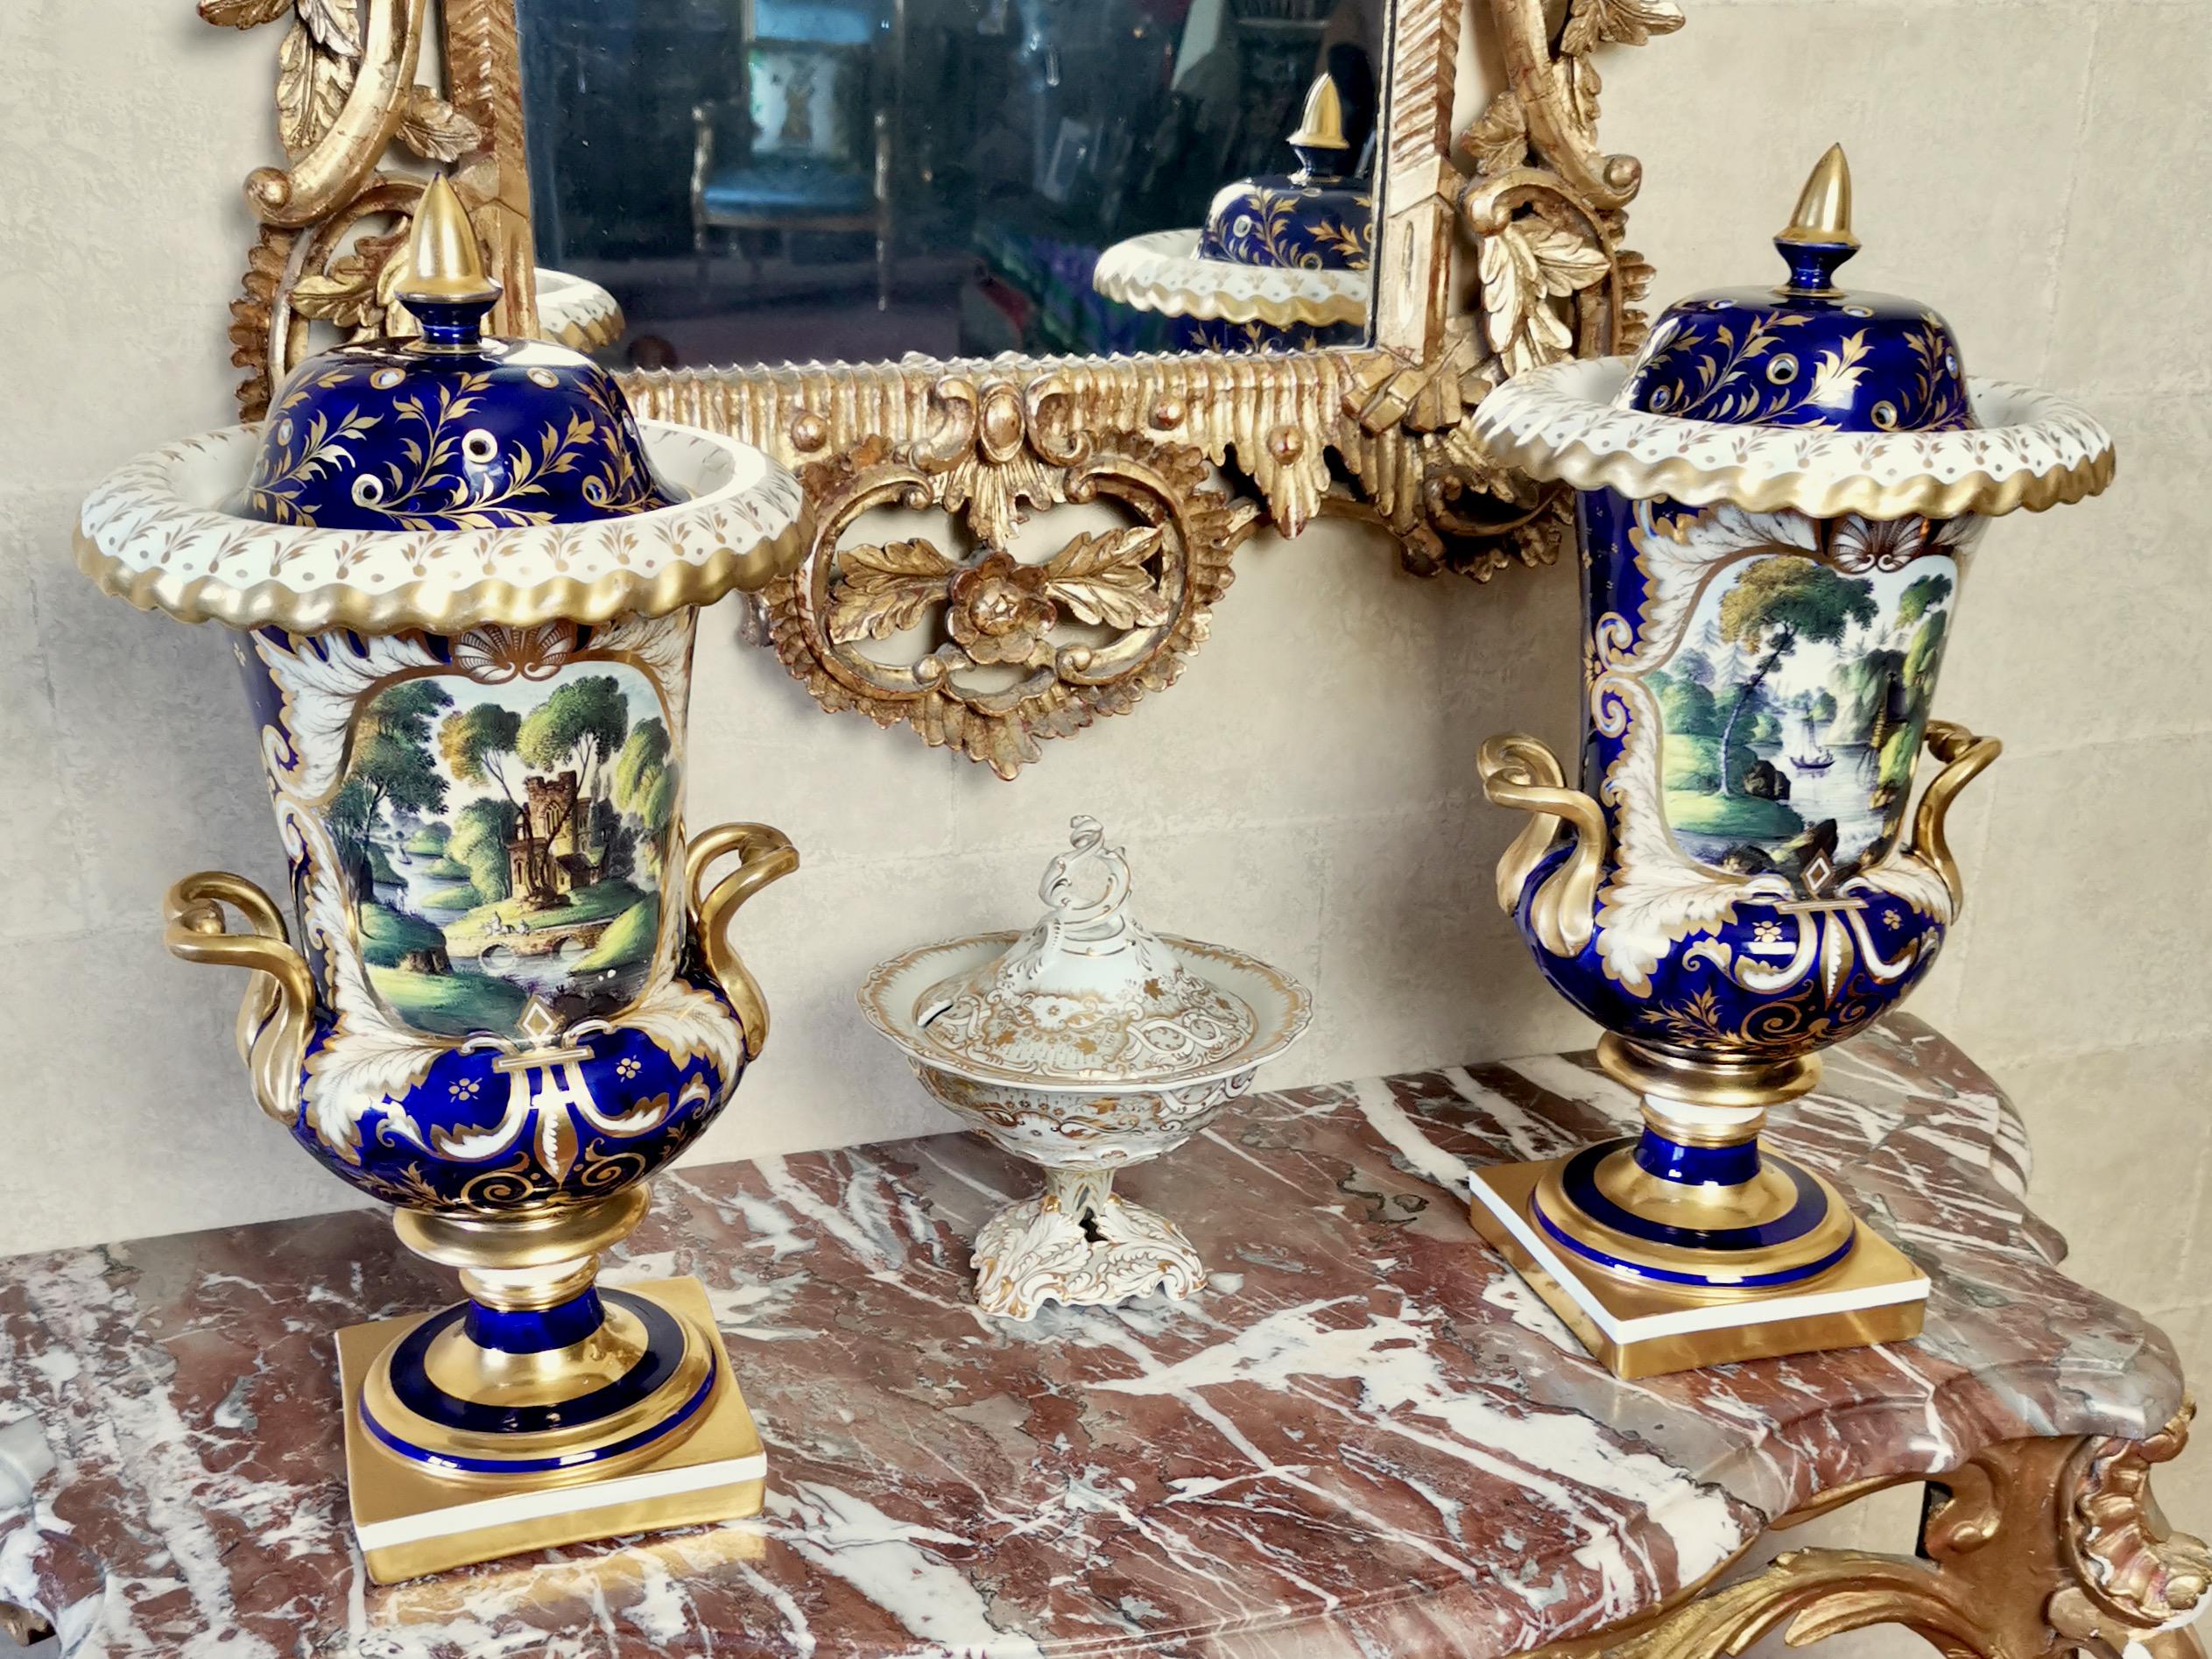 On offer is a stunning pair of potpourri vases with covers, made by one of the great English (and probably Staffordshire) factories in about 1830. The vases are in excellent condition with some light restoration and have stunning gilding and hand